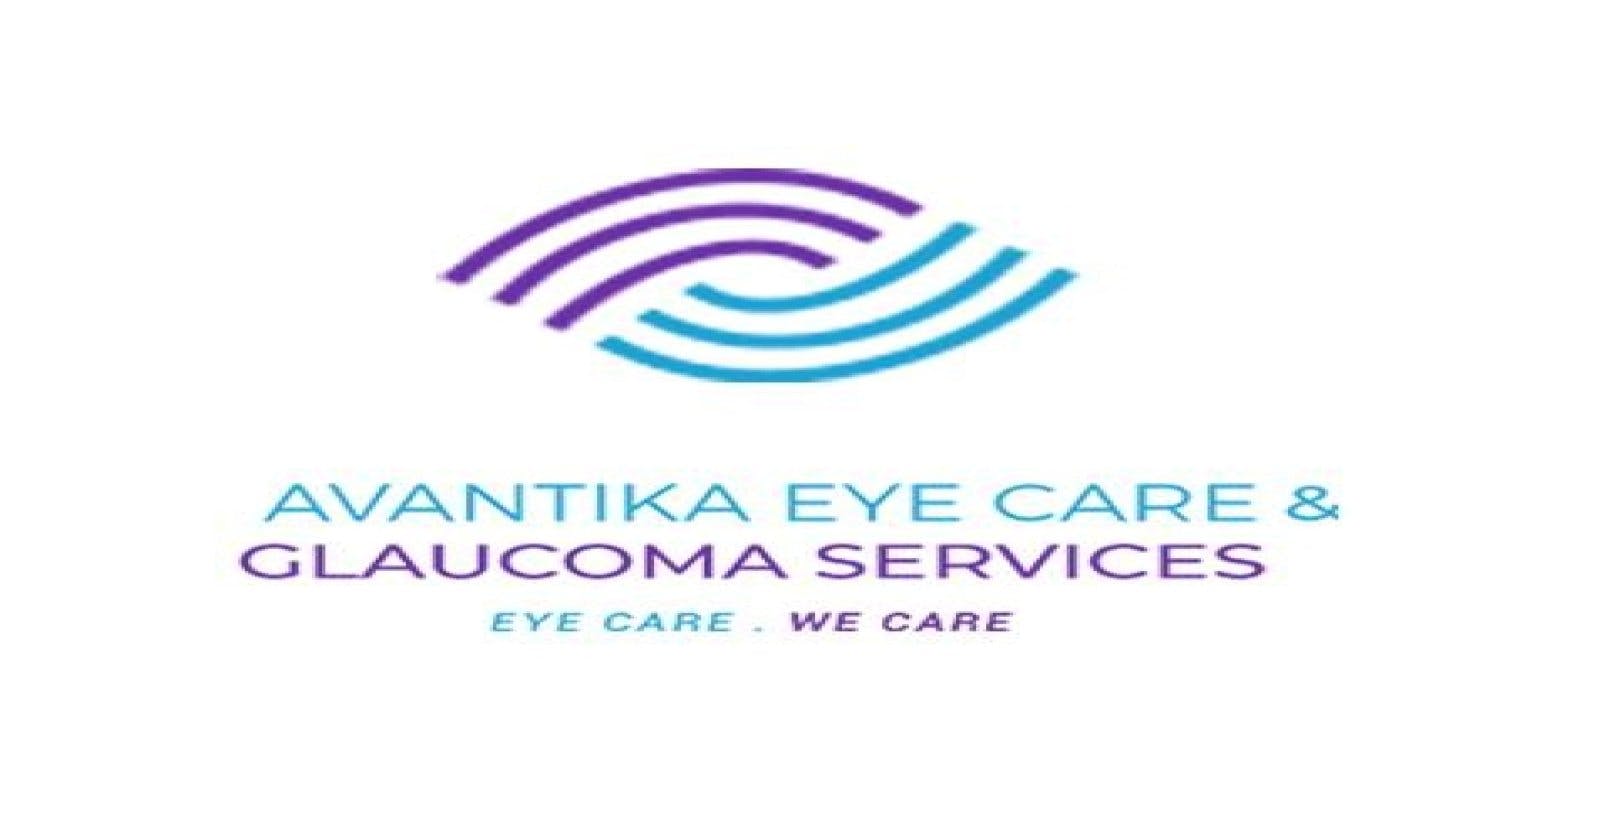 Visionary Care: Dr. Neha Midha - Your Trusted Cataract Surgeon in North Delhi & Glaucoma Specialist in Rohini